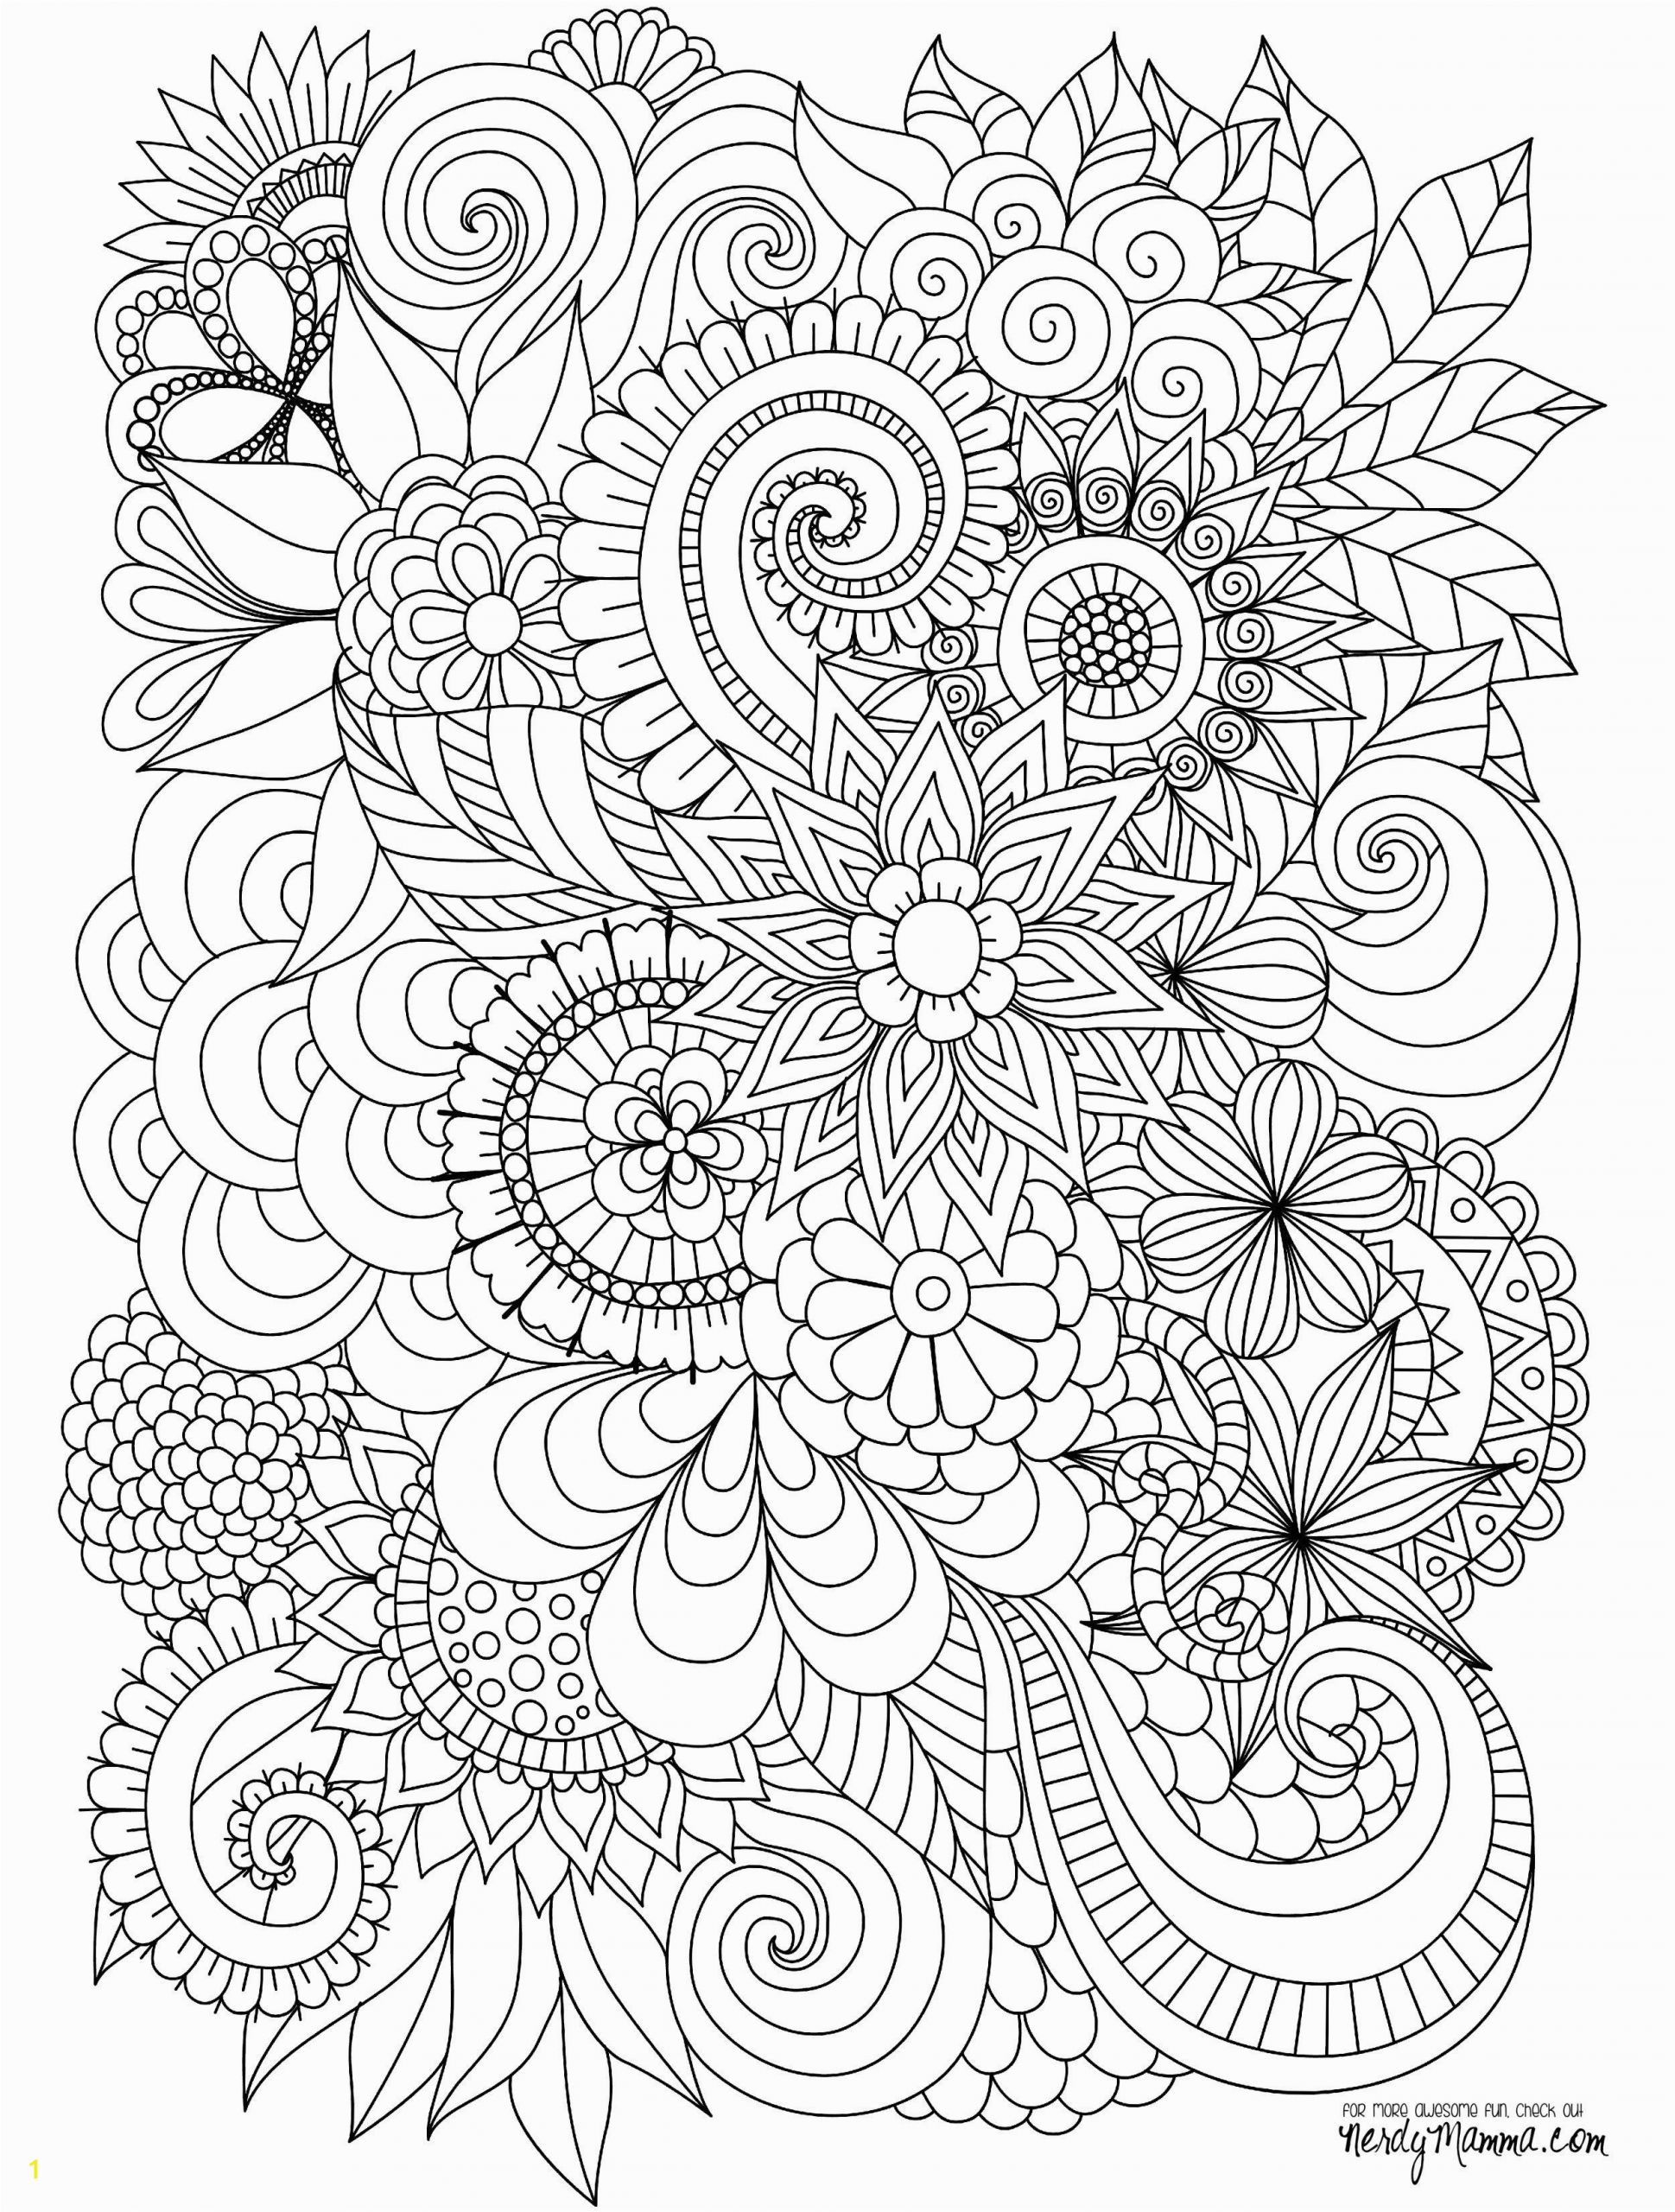 Free Printable Coloring Pages for Adults Advanced 11 Free Printable Adult Coloring Pages